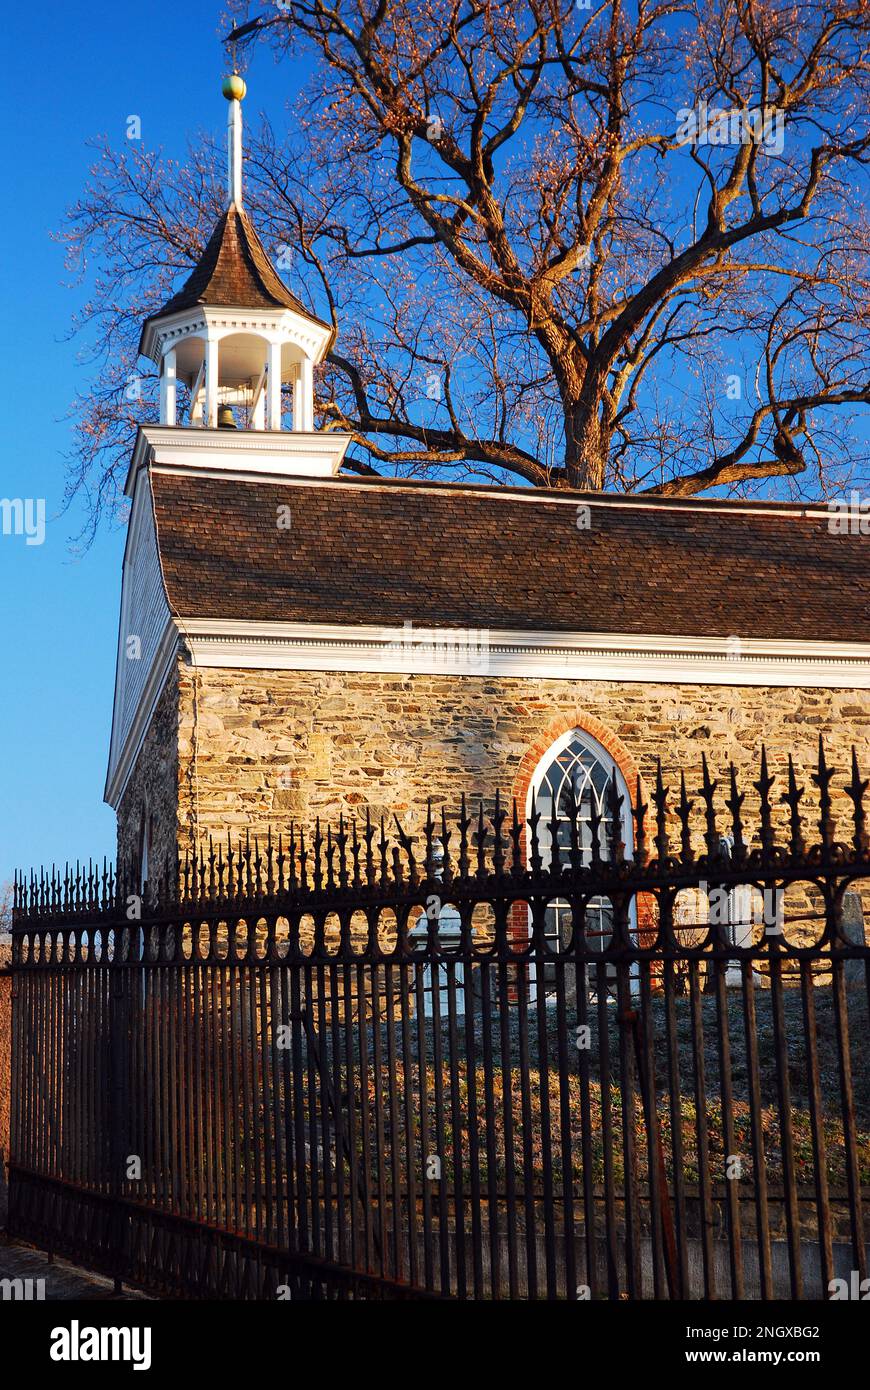 https://c8.alamy.com/comp/2NGXBG2/the-old-dutch-church-one-of-the-settings-for-the-legend-of-sleepy-hollow-the-story-of-the-headless-horseman-by-washington-irving-2NGXBG2.jpg